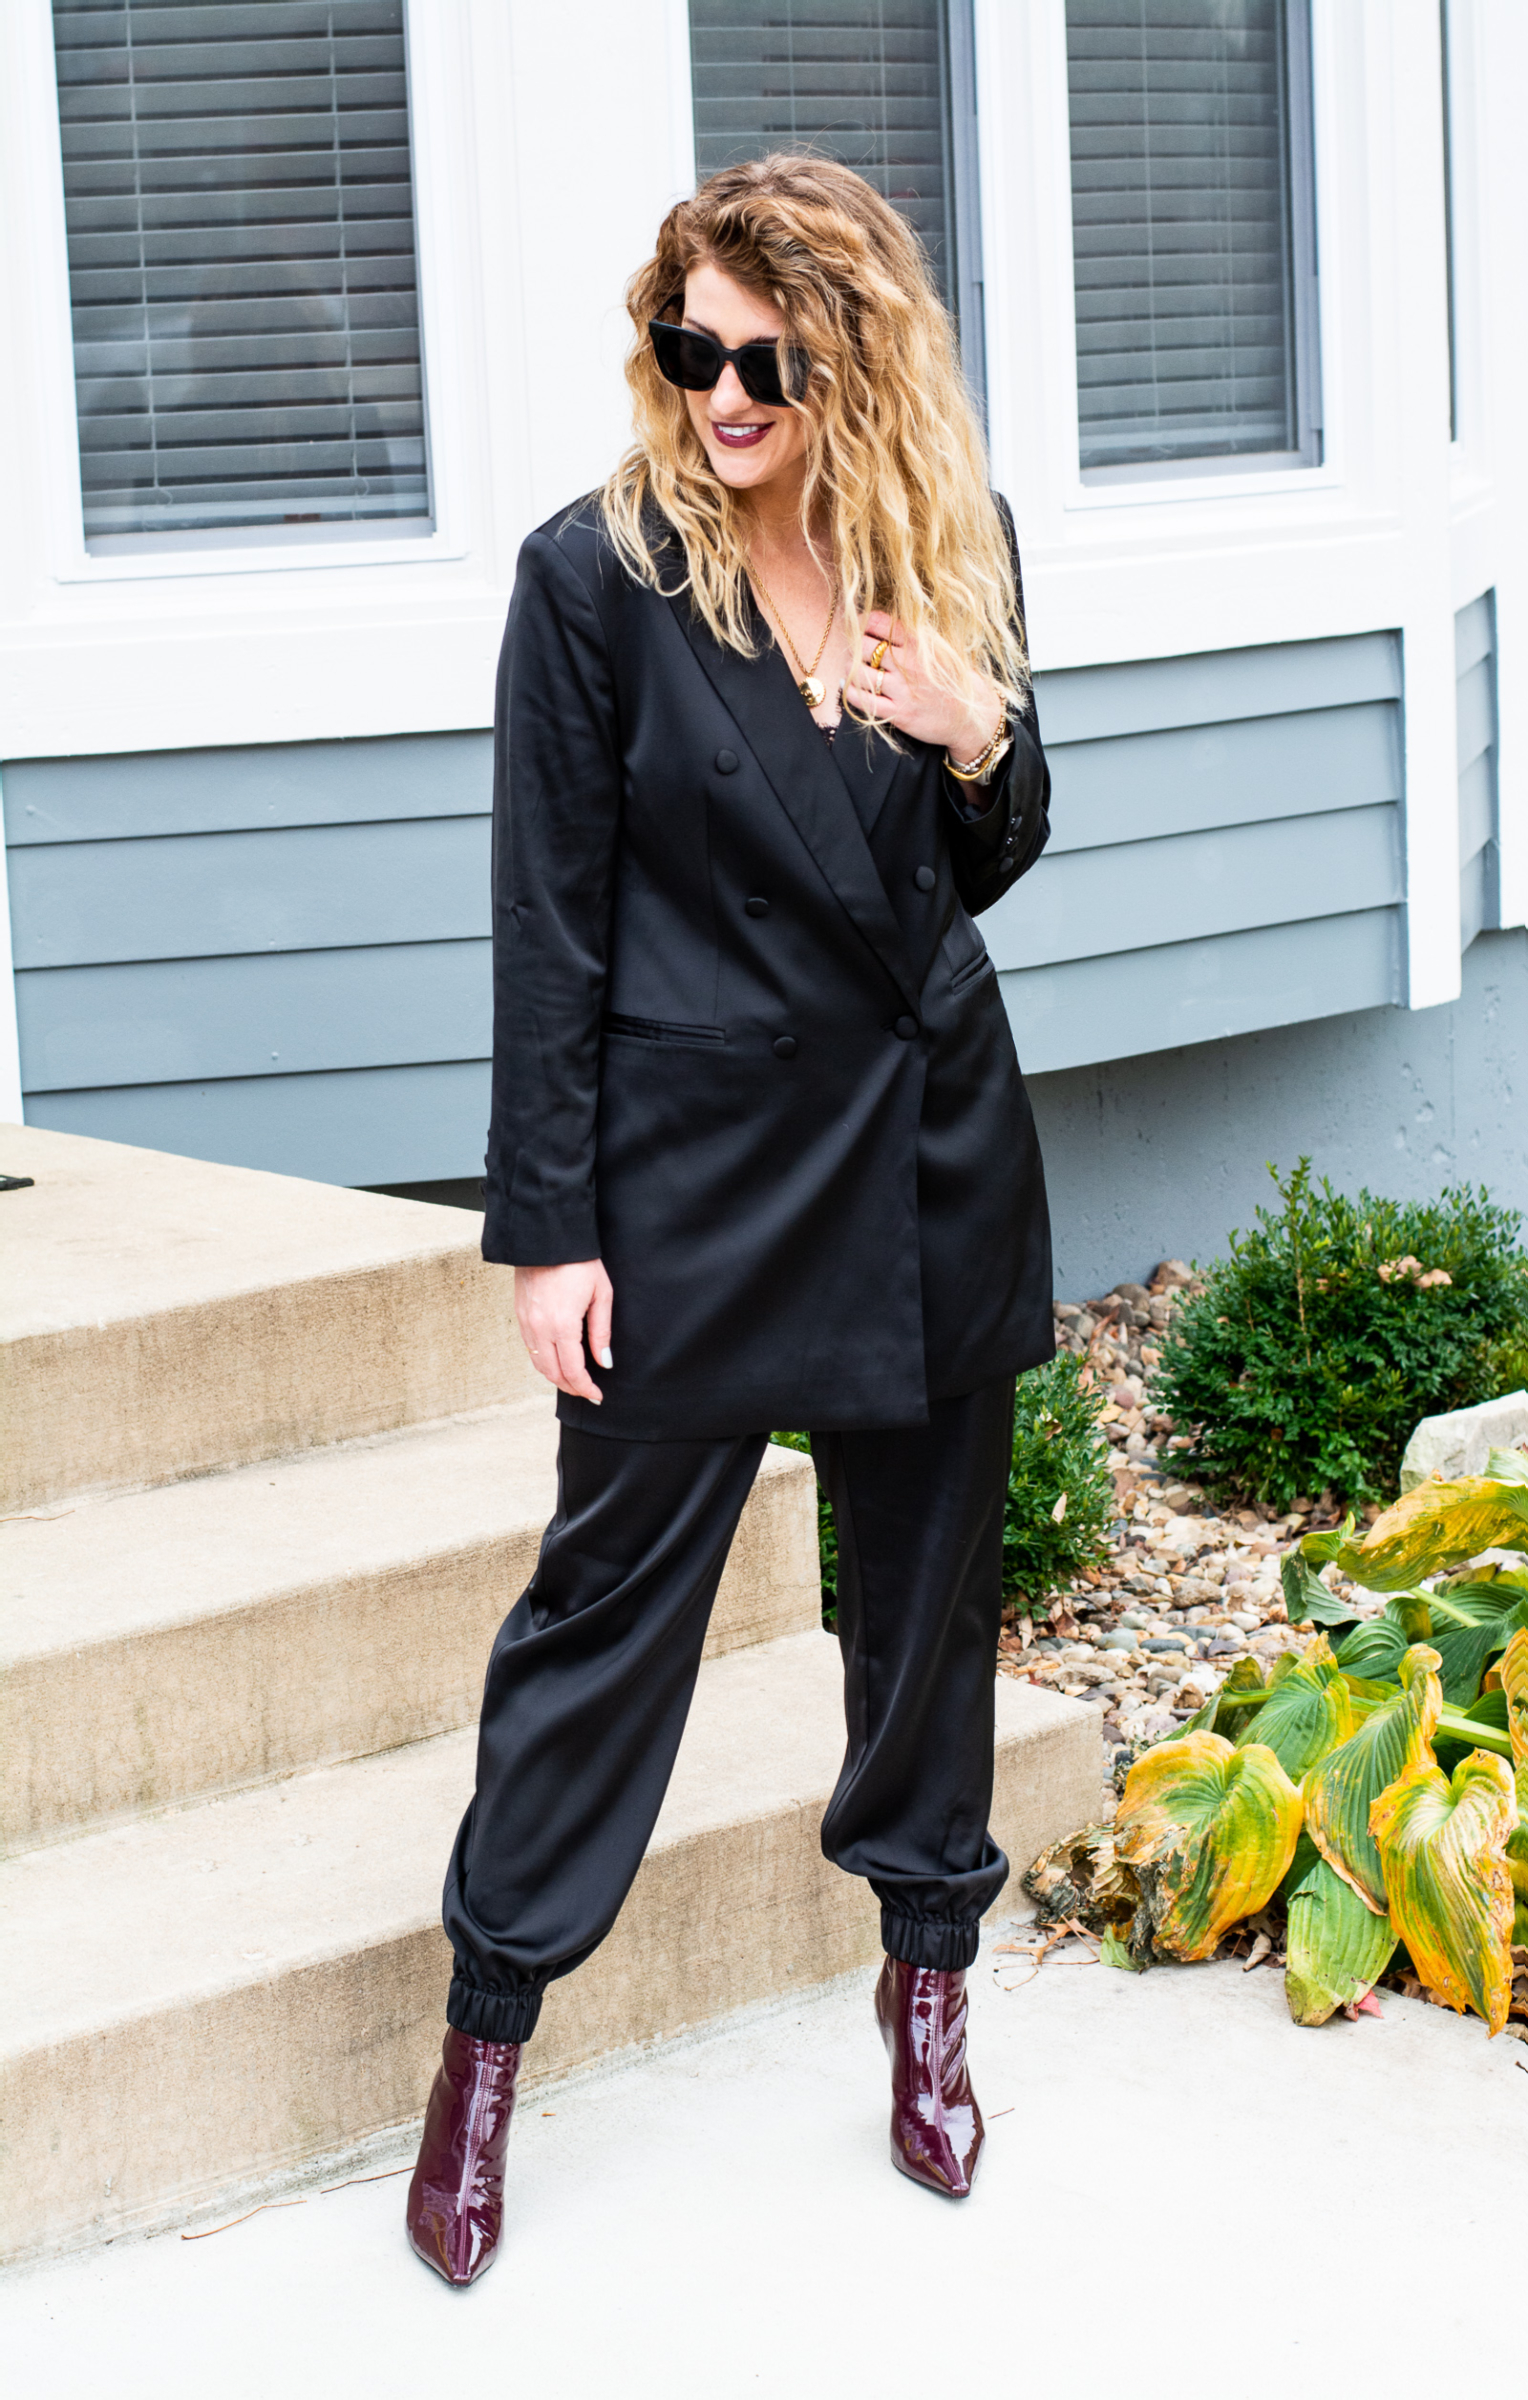 Satin Suit from KERRently the Drop for a Chic Holiday Outfit. | LSR